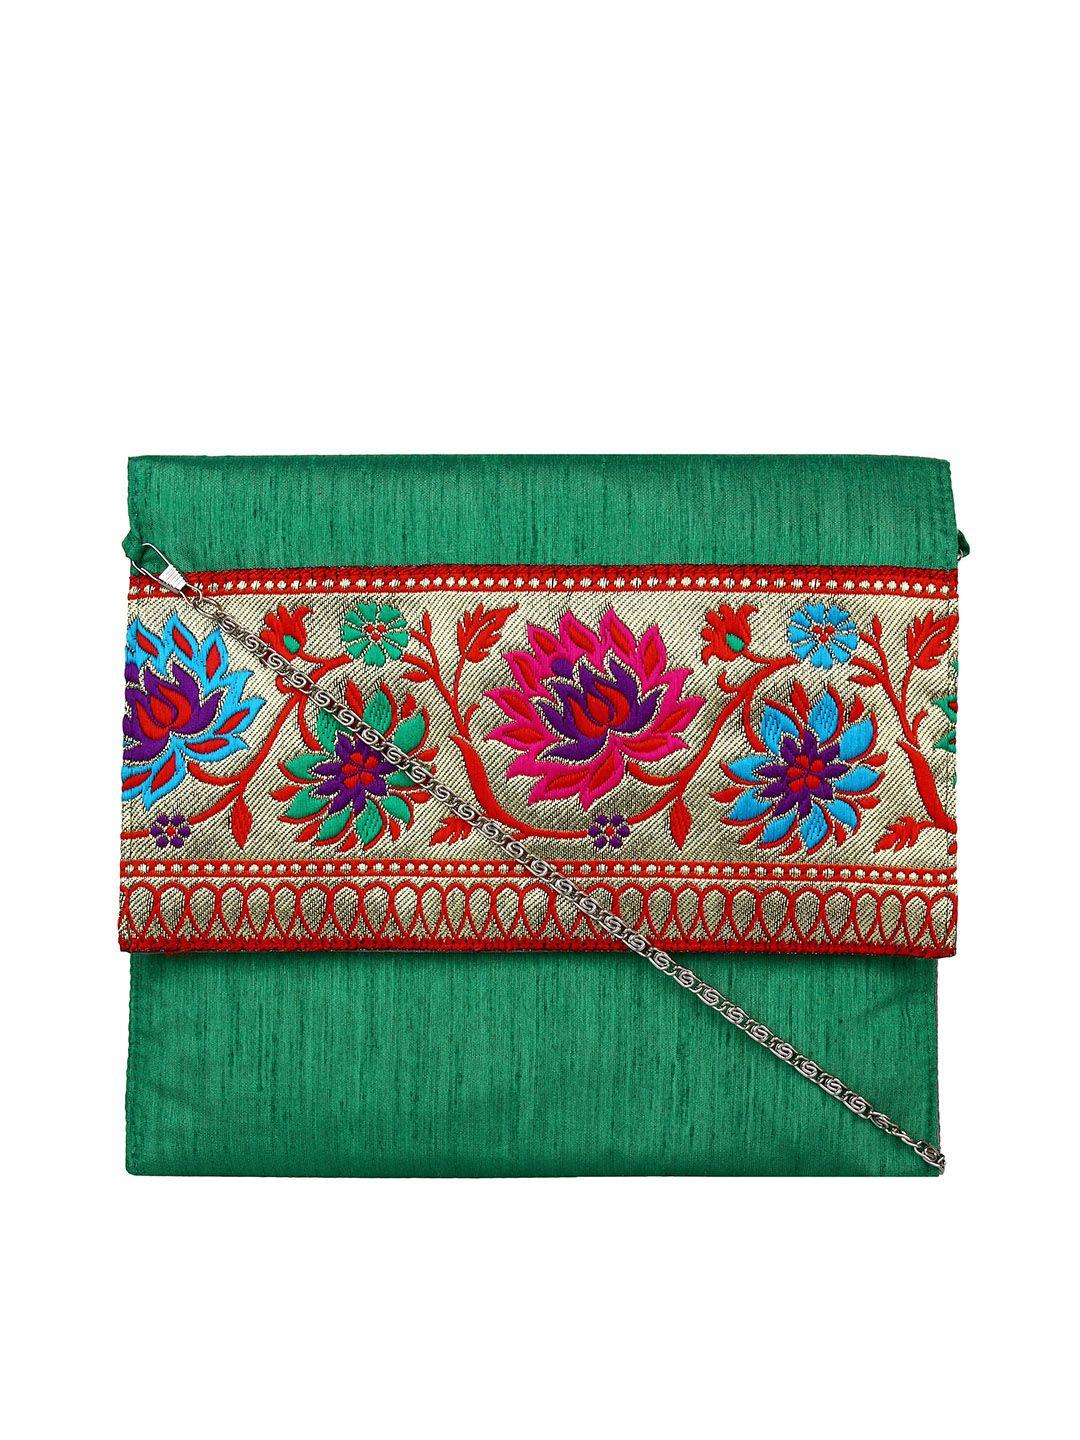 anekaant green embroidered clutch with sling strap